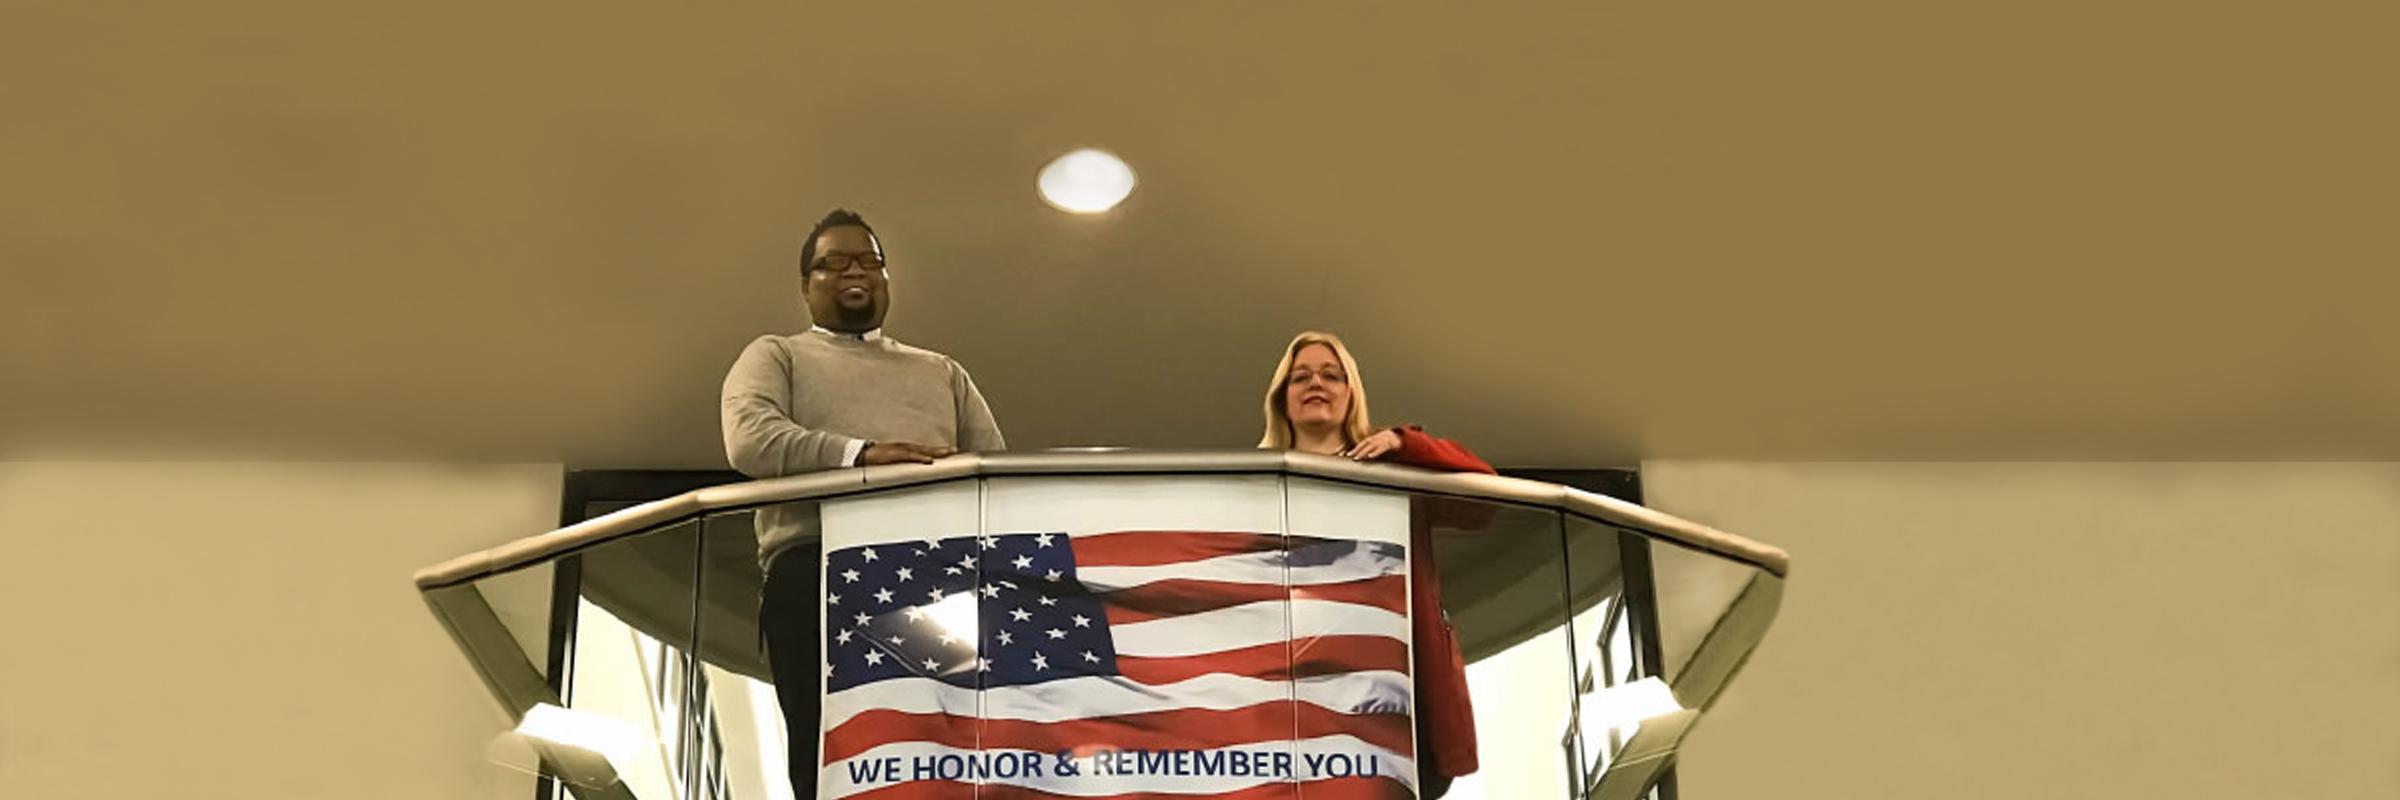 Mareco Smith and Denise Christiansen stand at a railing with a flag poster that says, "We honor and remember you."